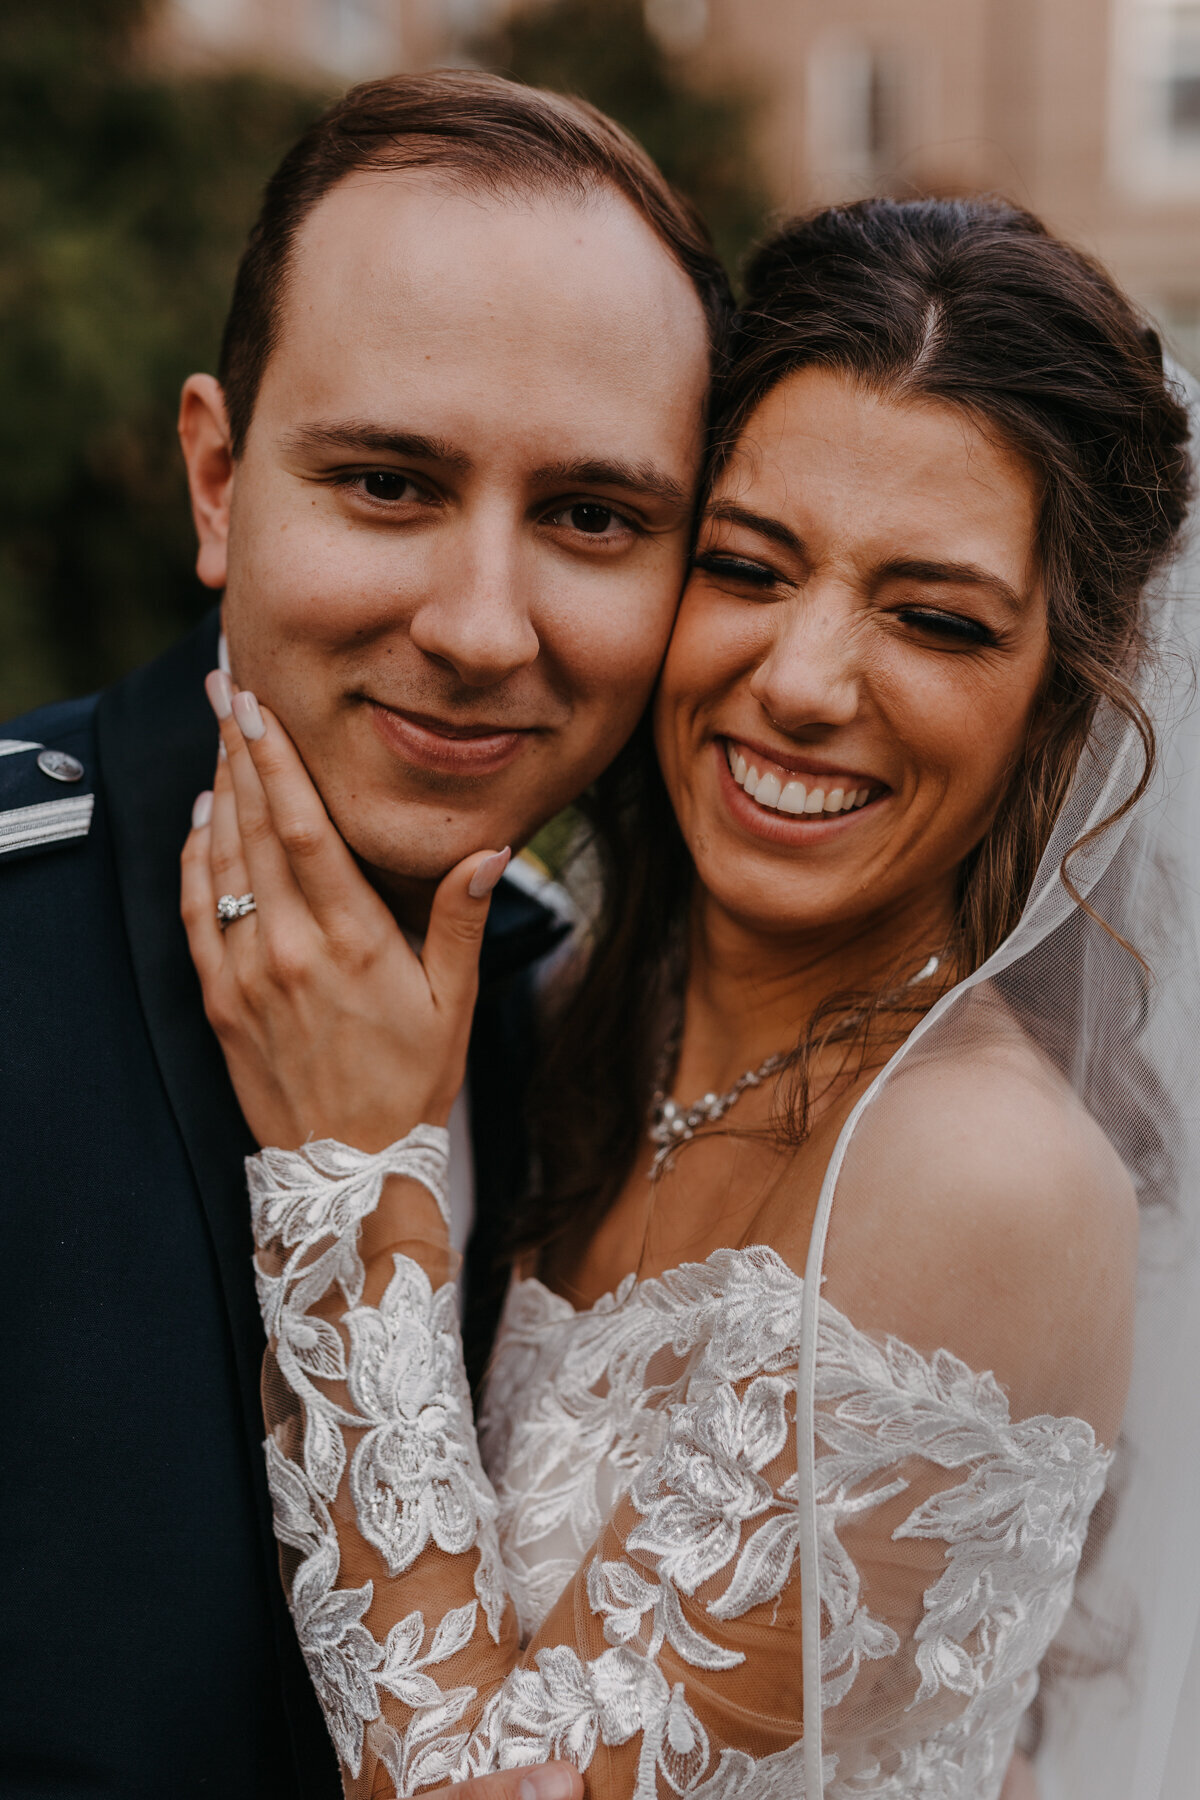 close up portrait of bride and grooms faces next to each other